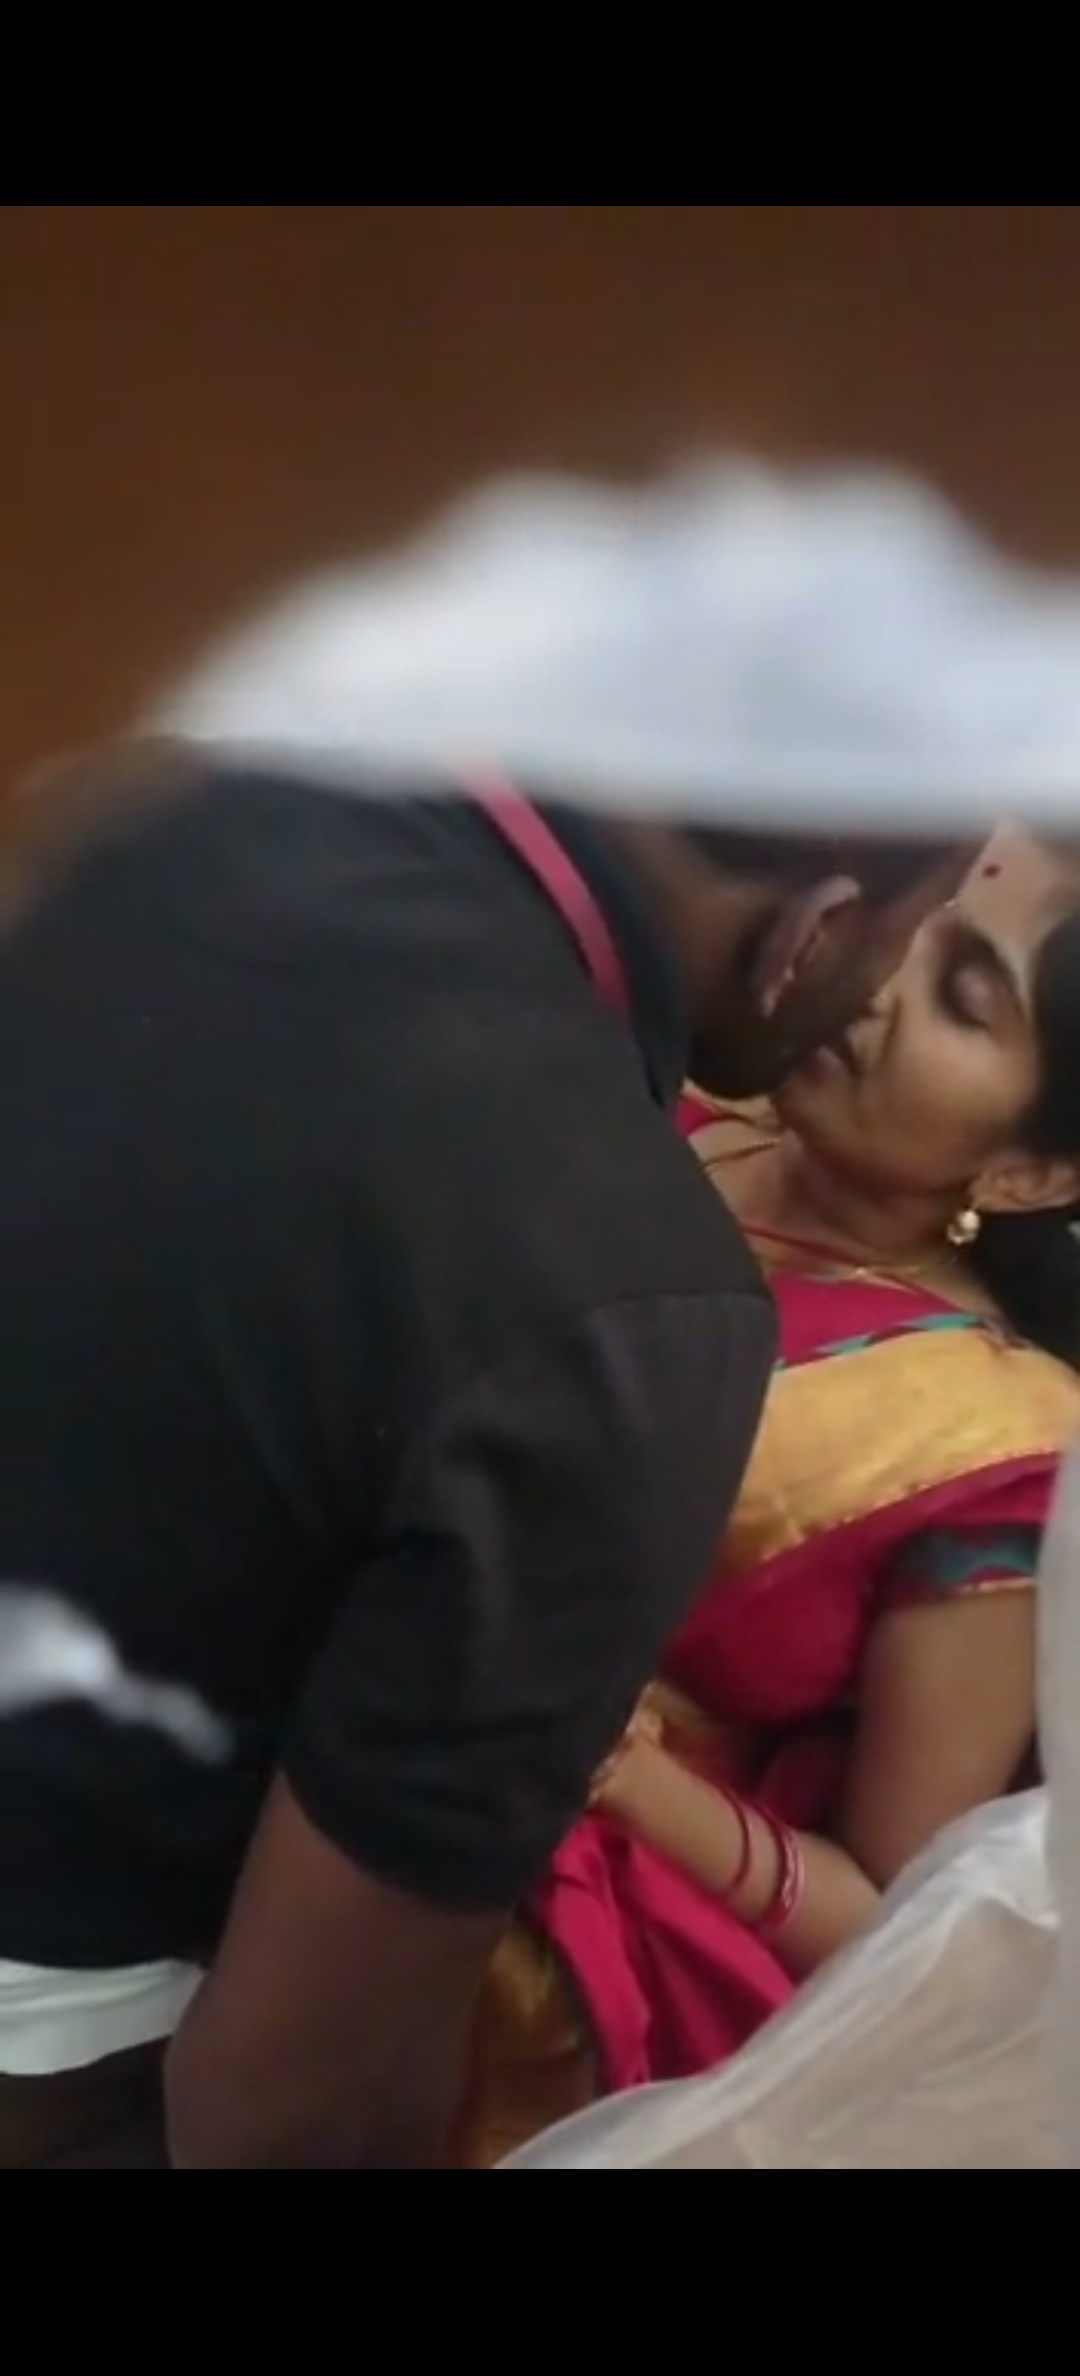 Tamil Lovers Store Room Hidden Full Video picture